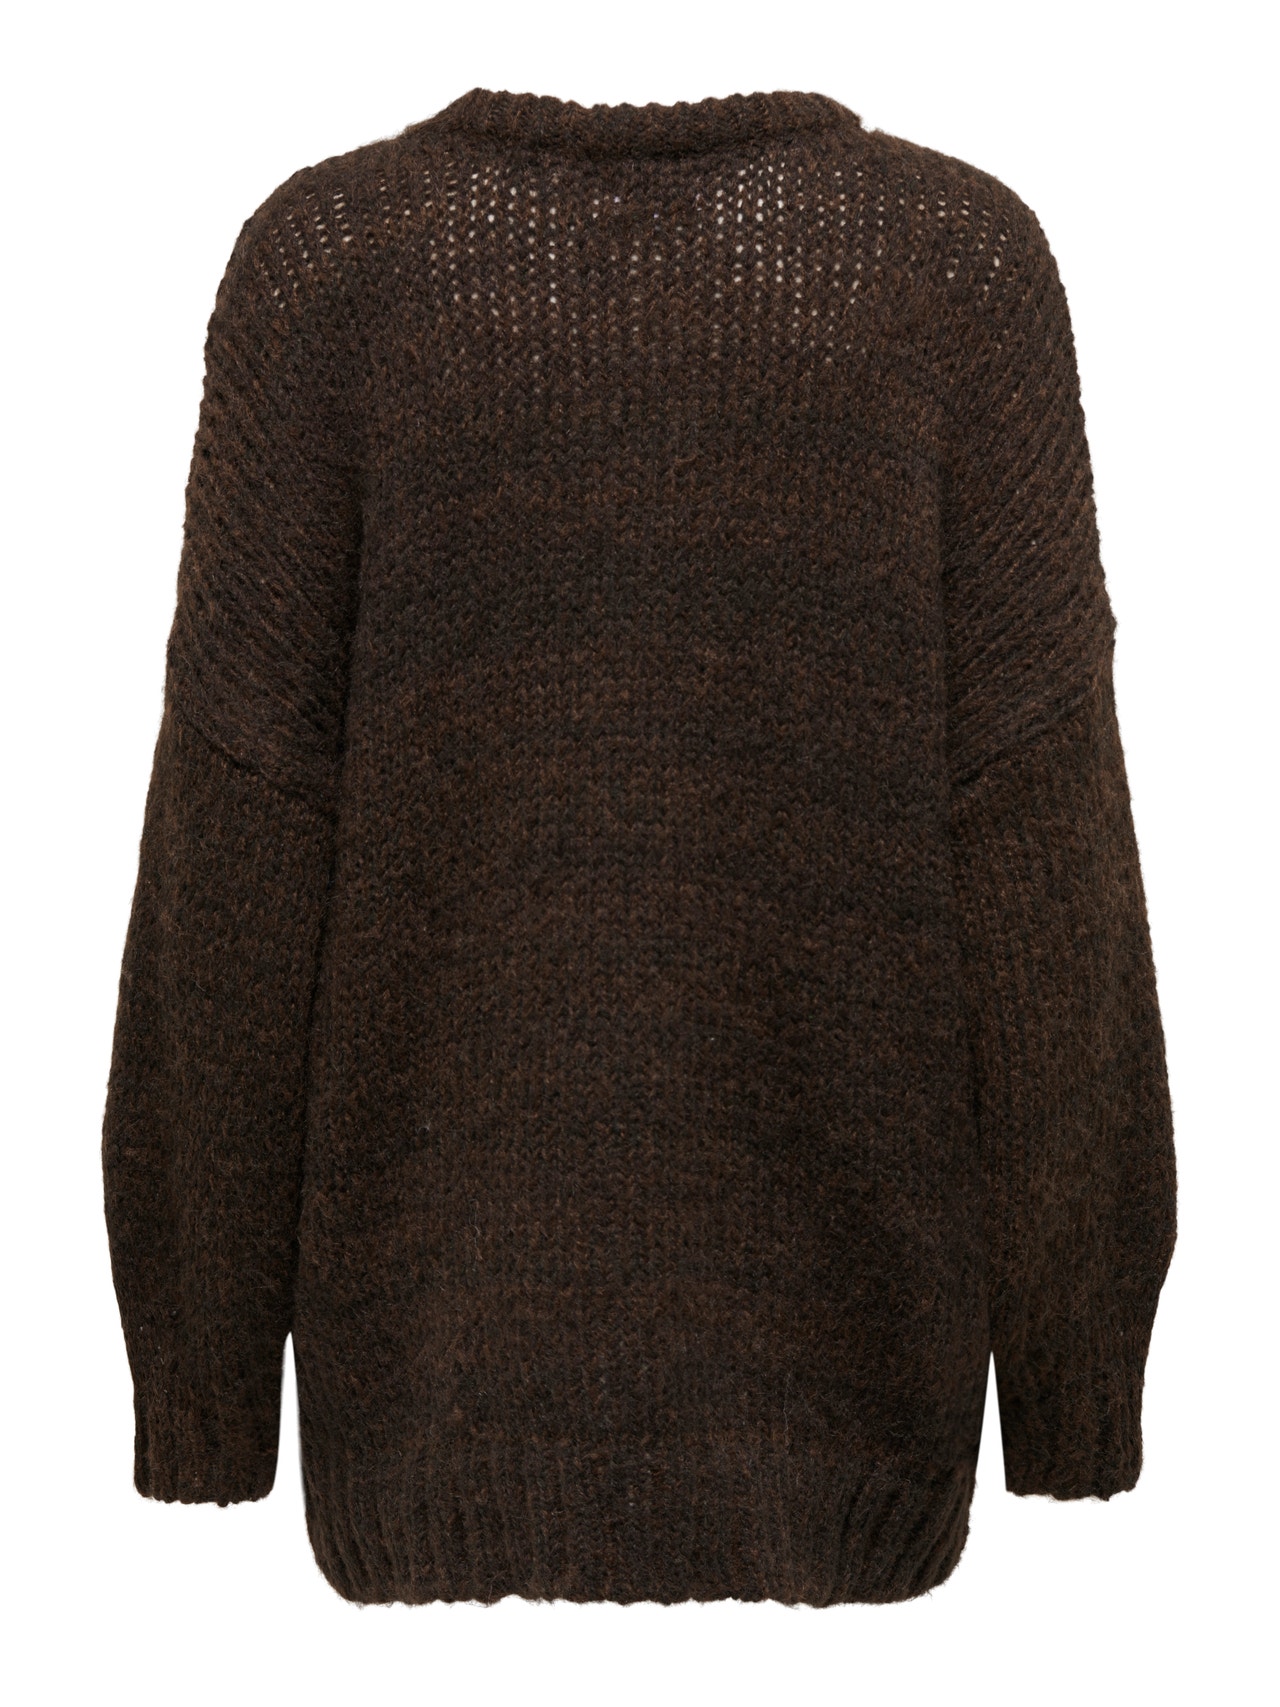 ONLY O-neck long knitted pullover -Chestnut - 15294657